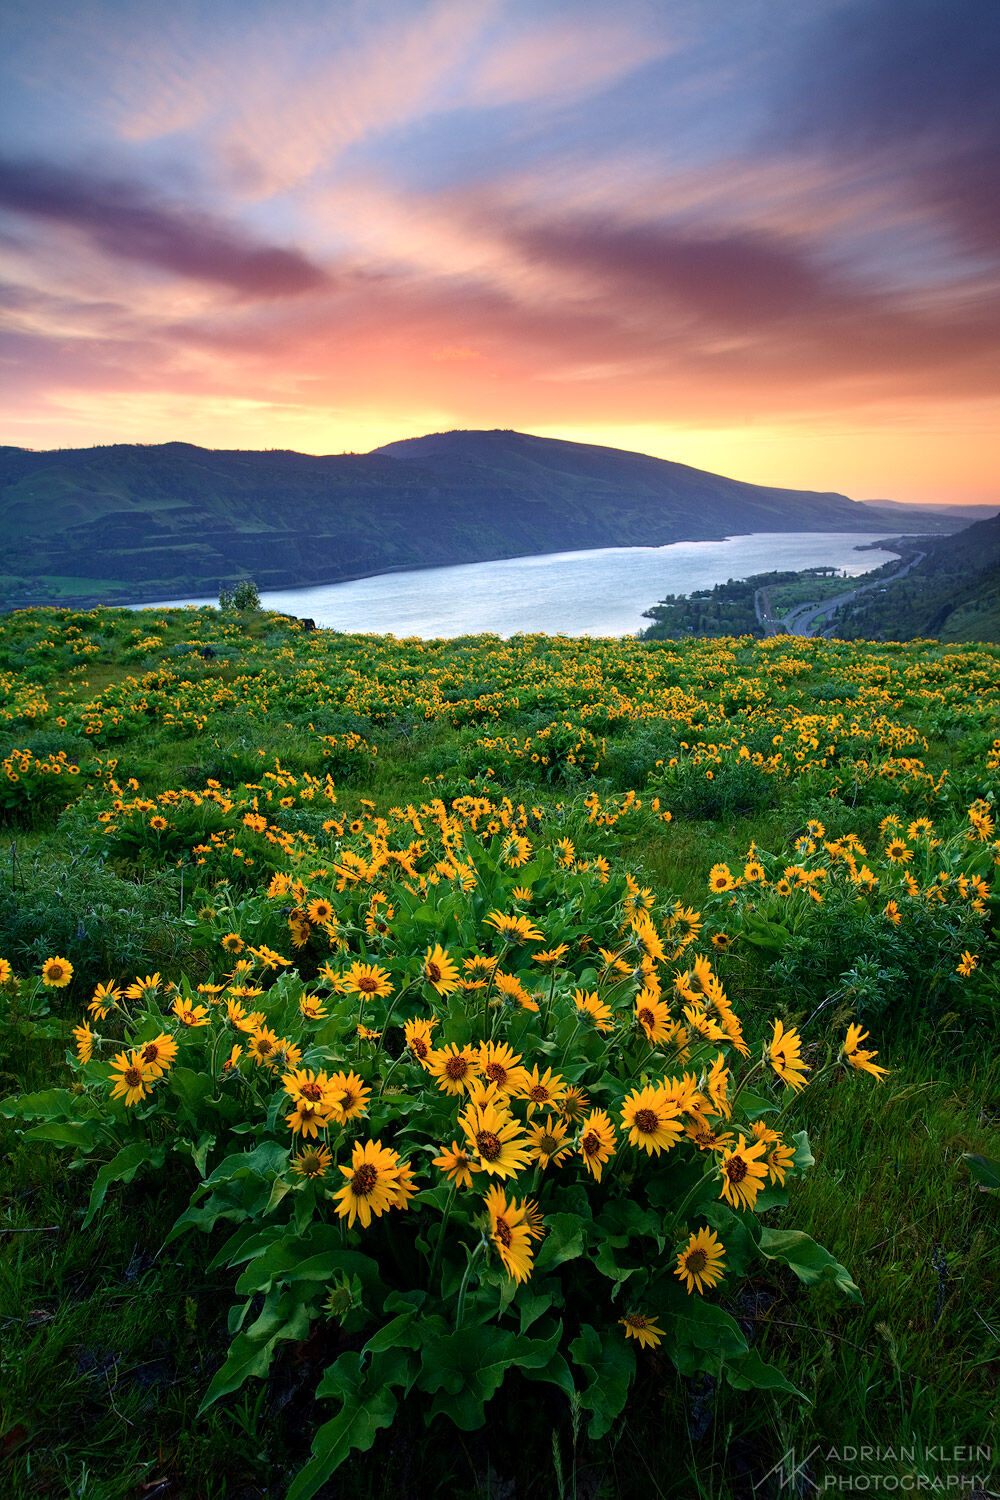 Sunrise in the Columbia River Gorge with the balsamroot in full bloom along the Oregon side of the Gorge. Limited Edition of...